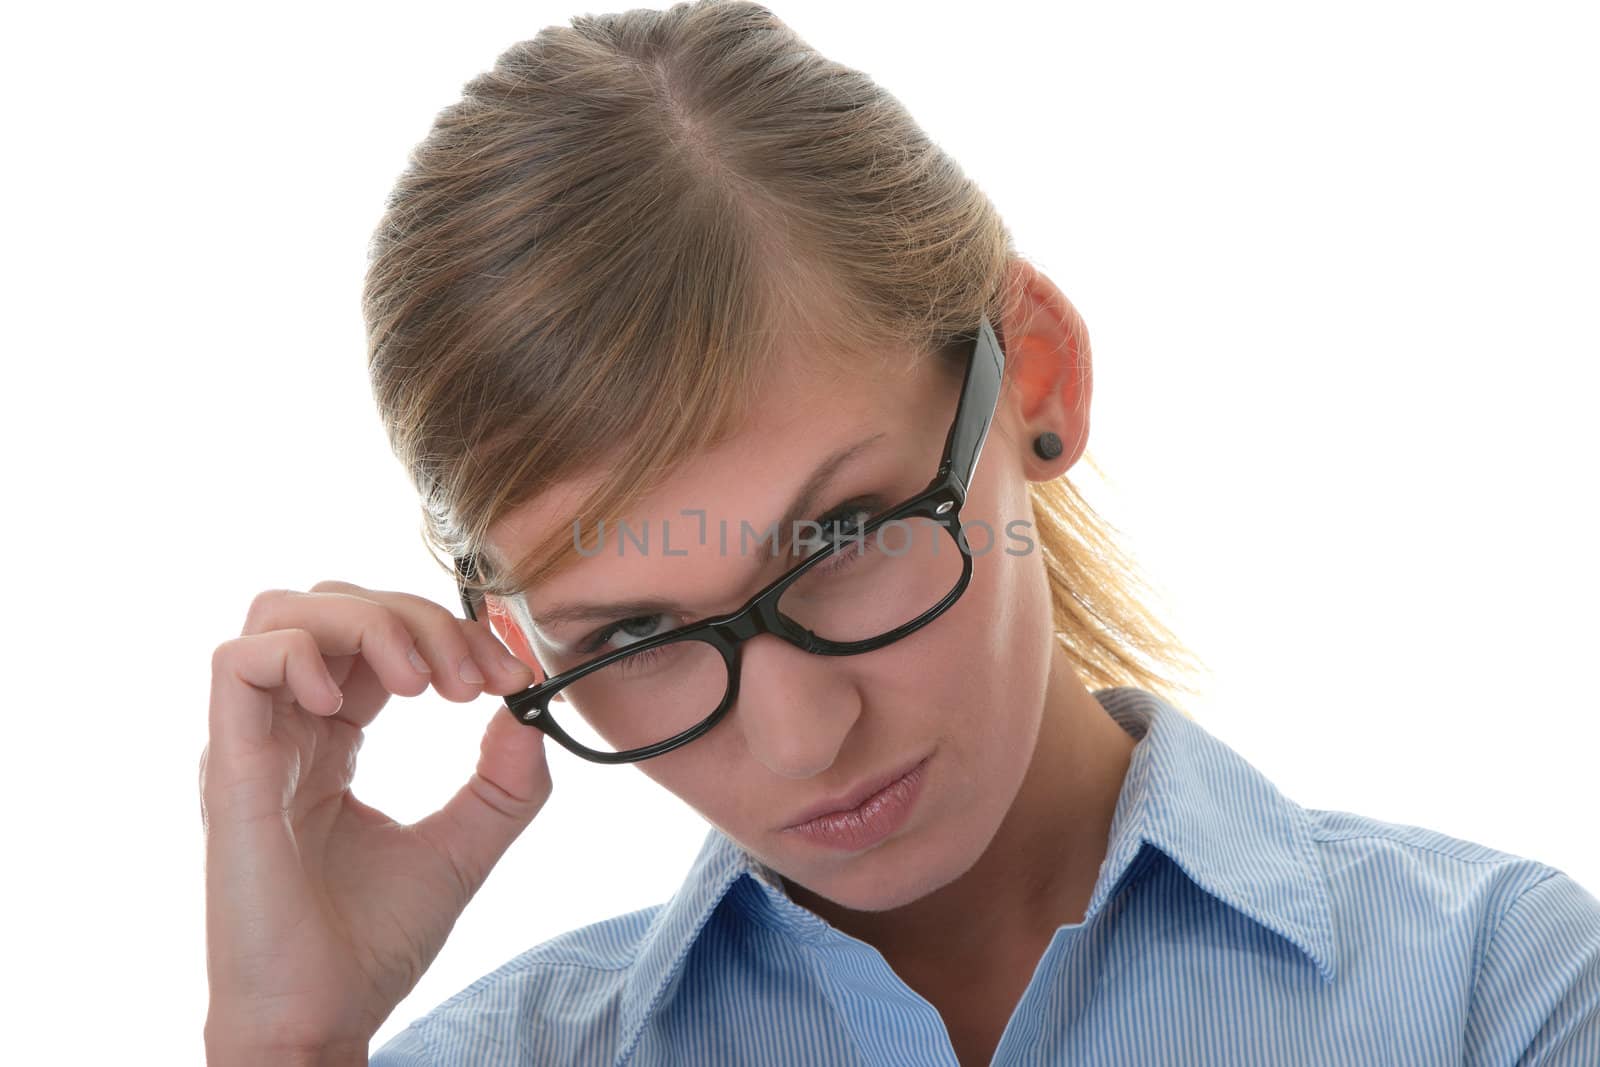 Portrait of a thoughtful young woman in blue shirt and glasses (student, secretary or businesswoman)